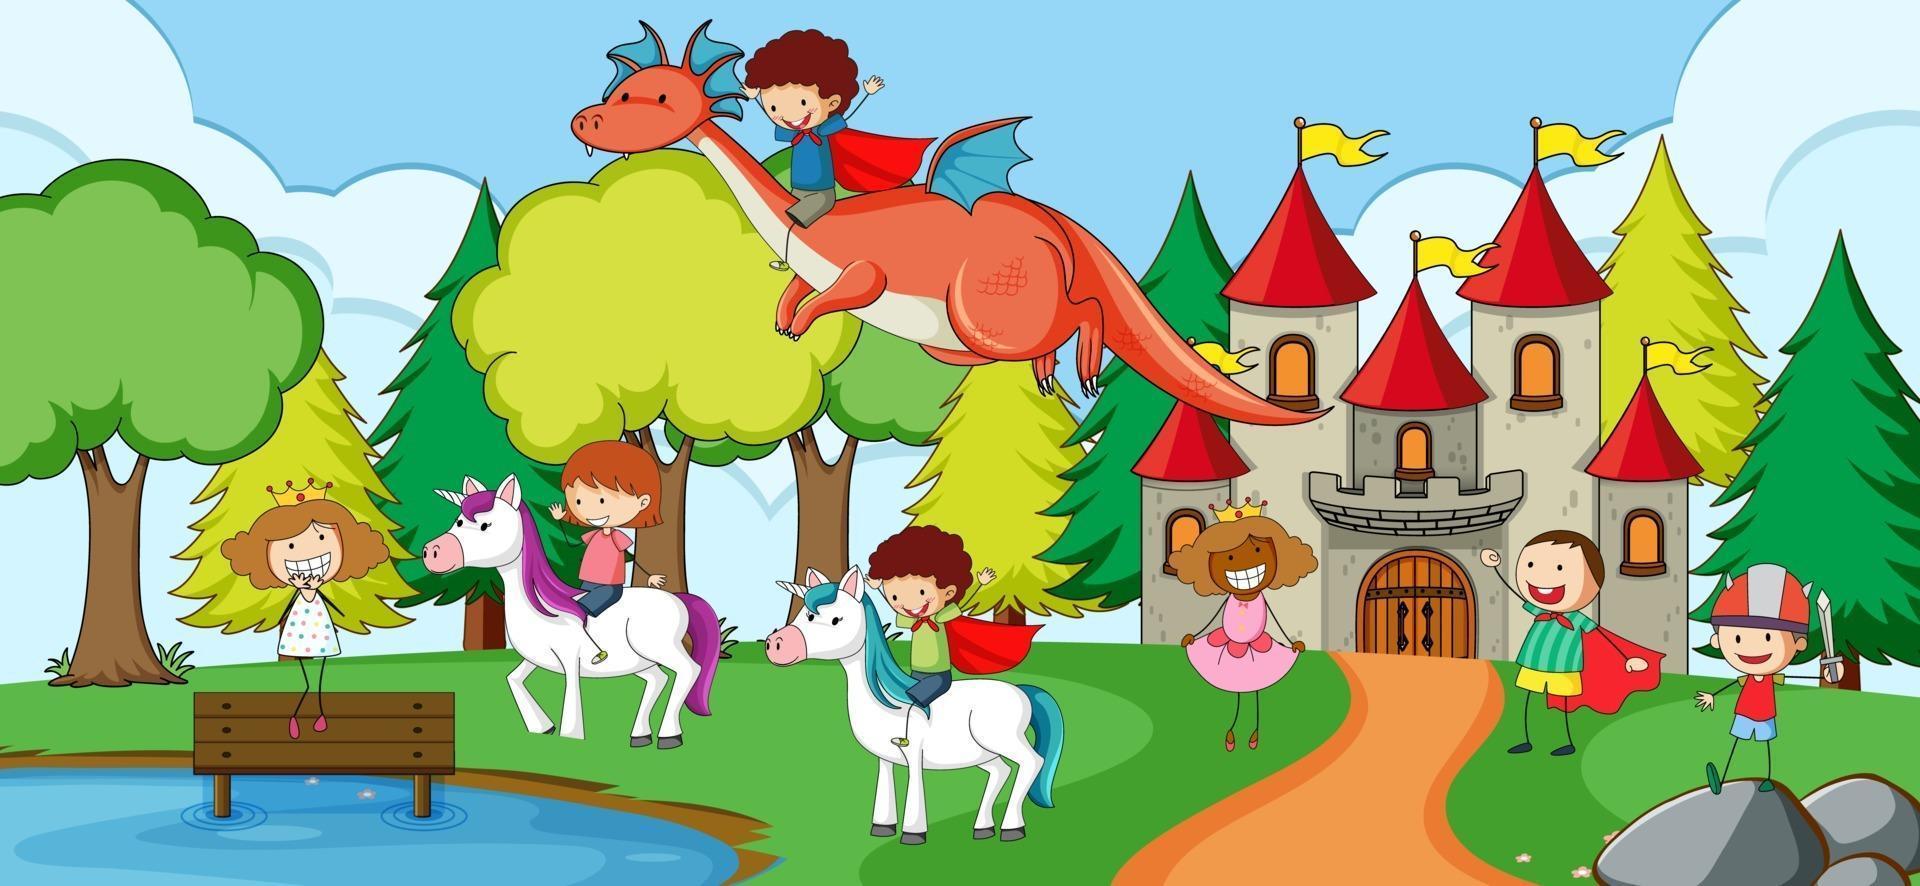 Many kids doodle cartoon character in nature scene with castle vector